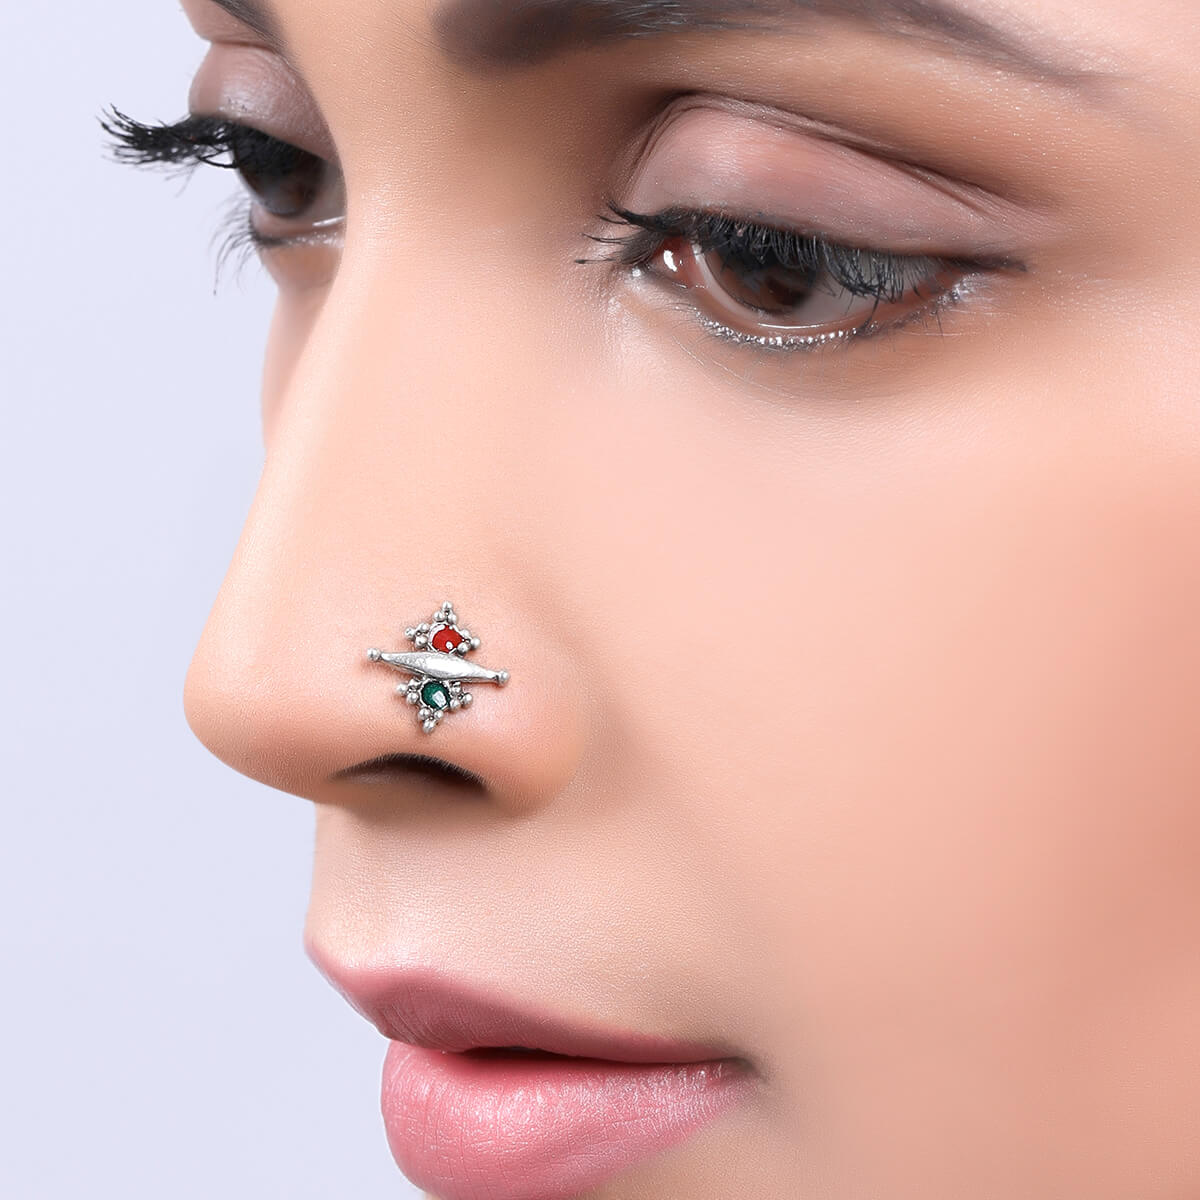 Different Types of Nose Ring Designs to Enhance Beauty - The Caratlane